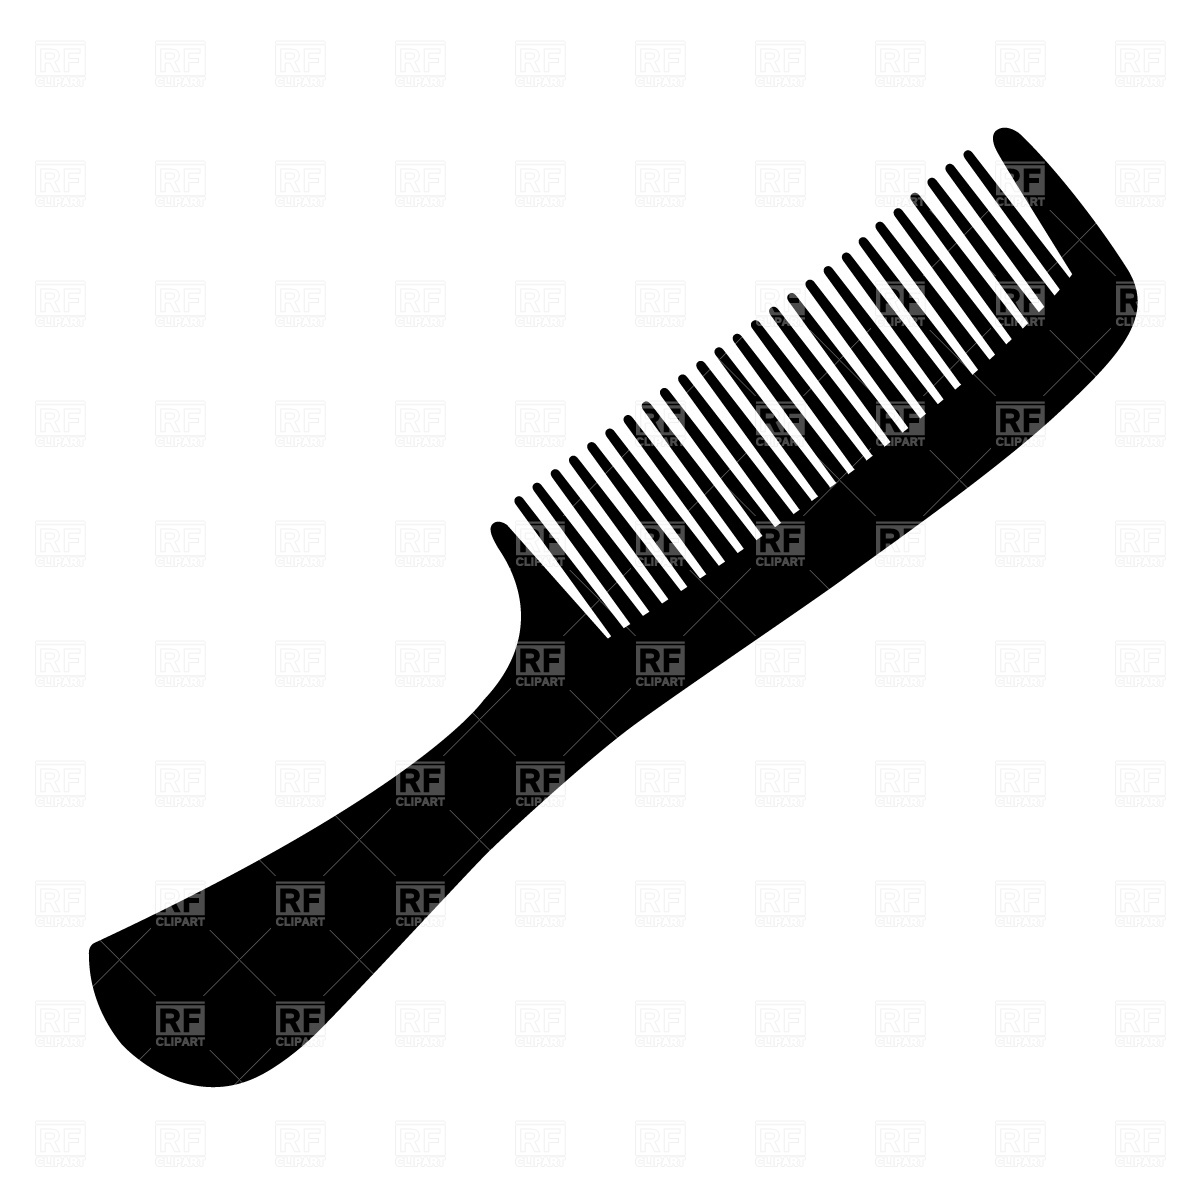 Comb Silhouette 1340 Beauty Fashion Download Free Vector Clipart